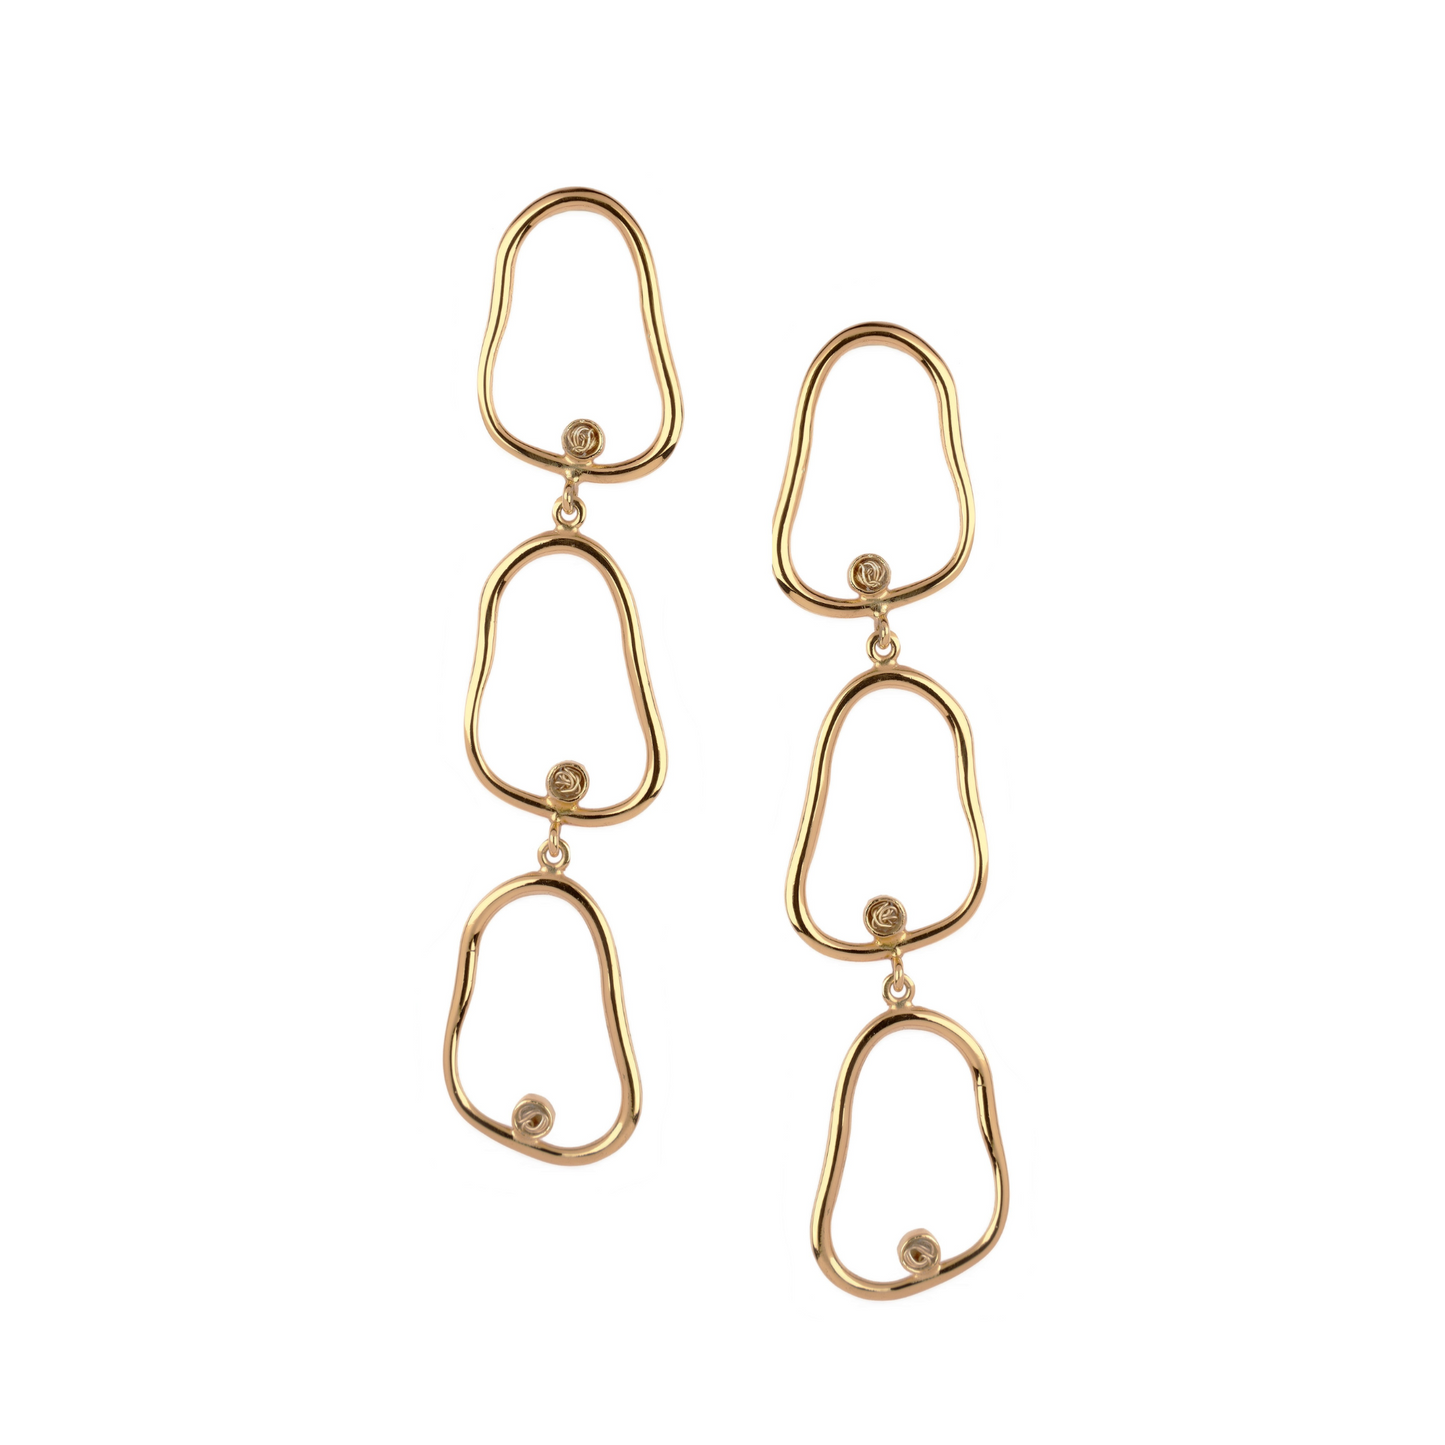 Handmade gold dangle earrings showcasing a blend of artisan details and contemporary design